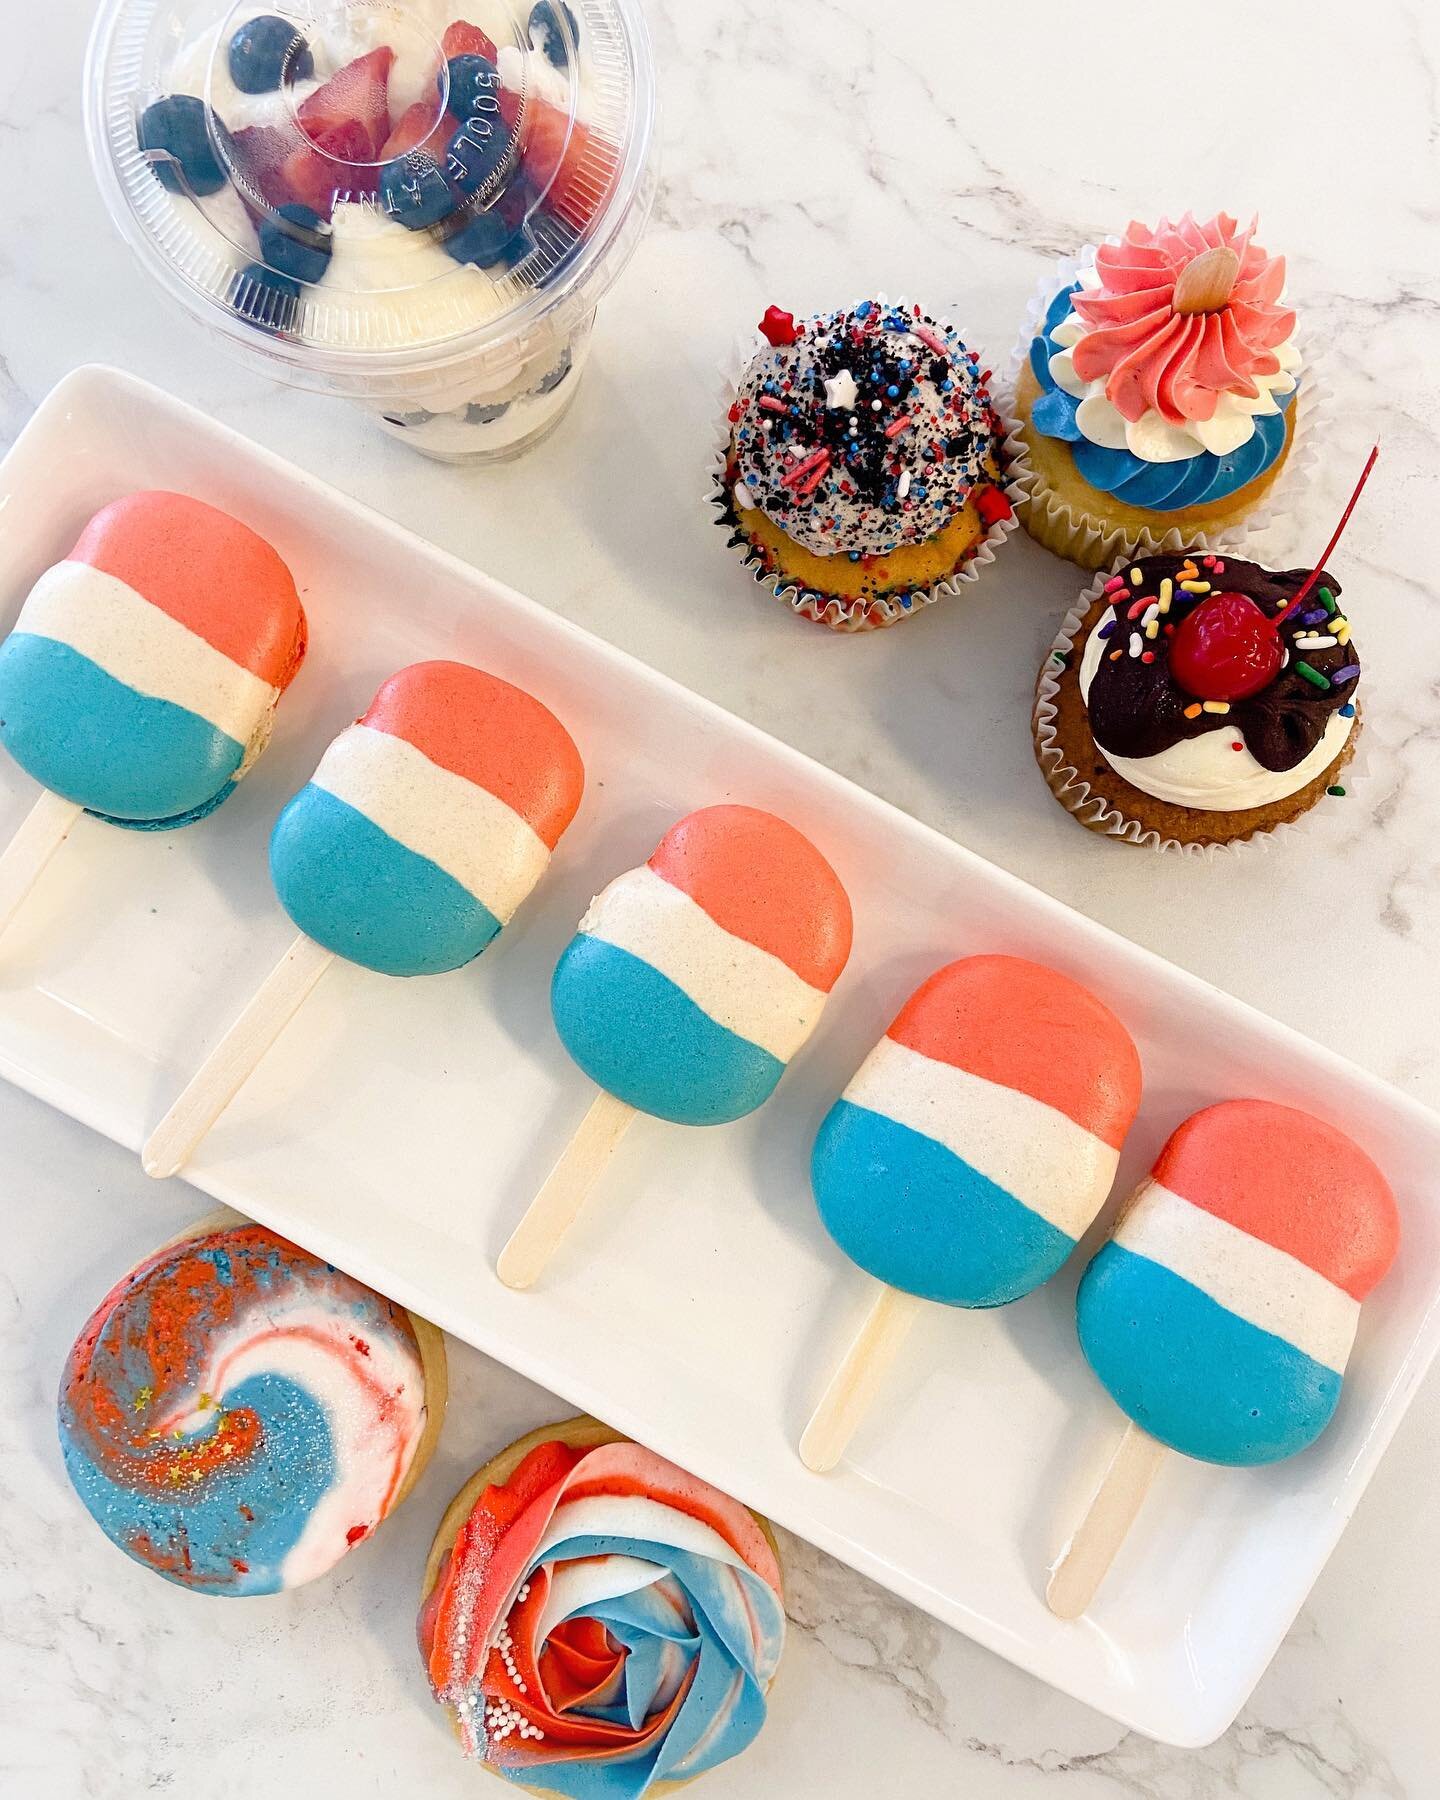 Are you ready for the Fourth of July?! ❤️🤍💙

Stop by Saturday &amp; Sunday for the cutest goodies!